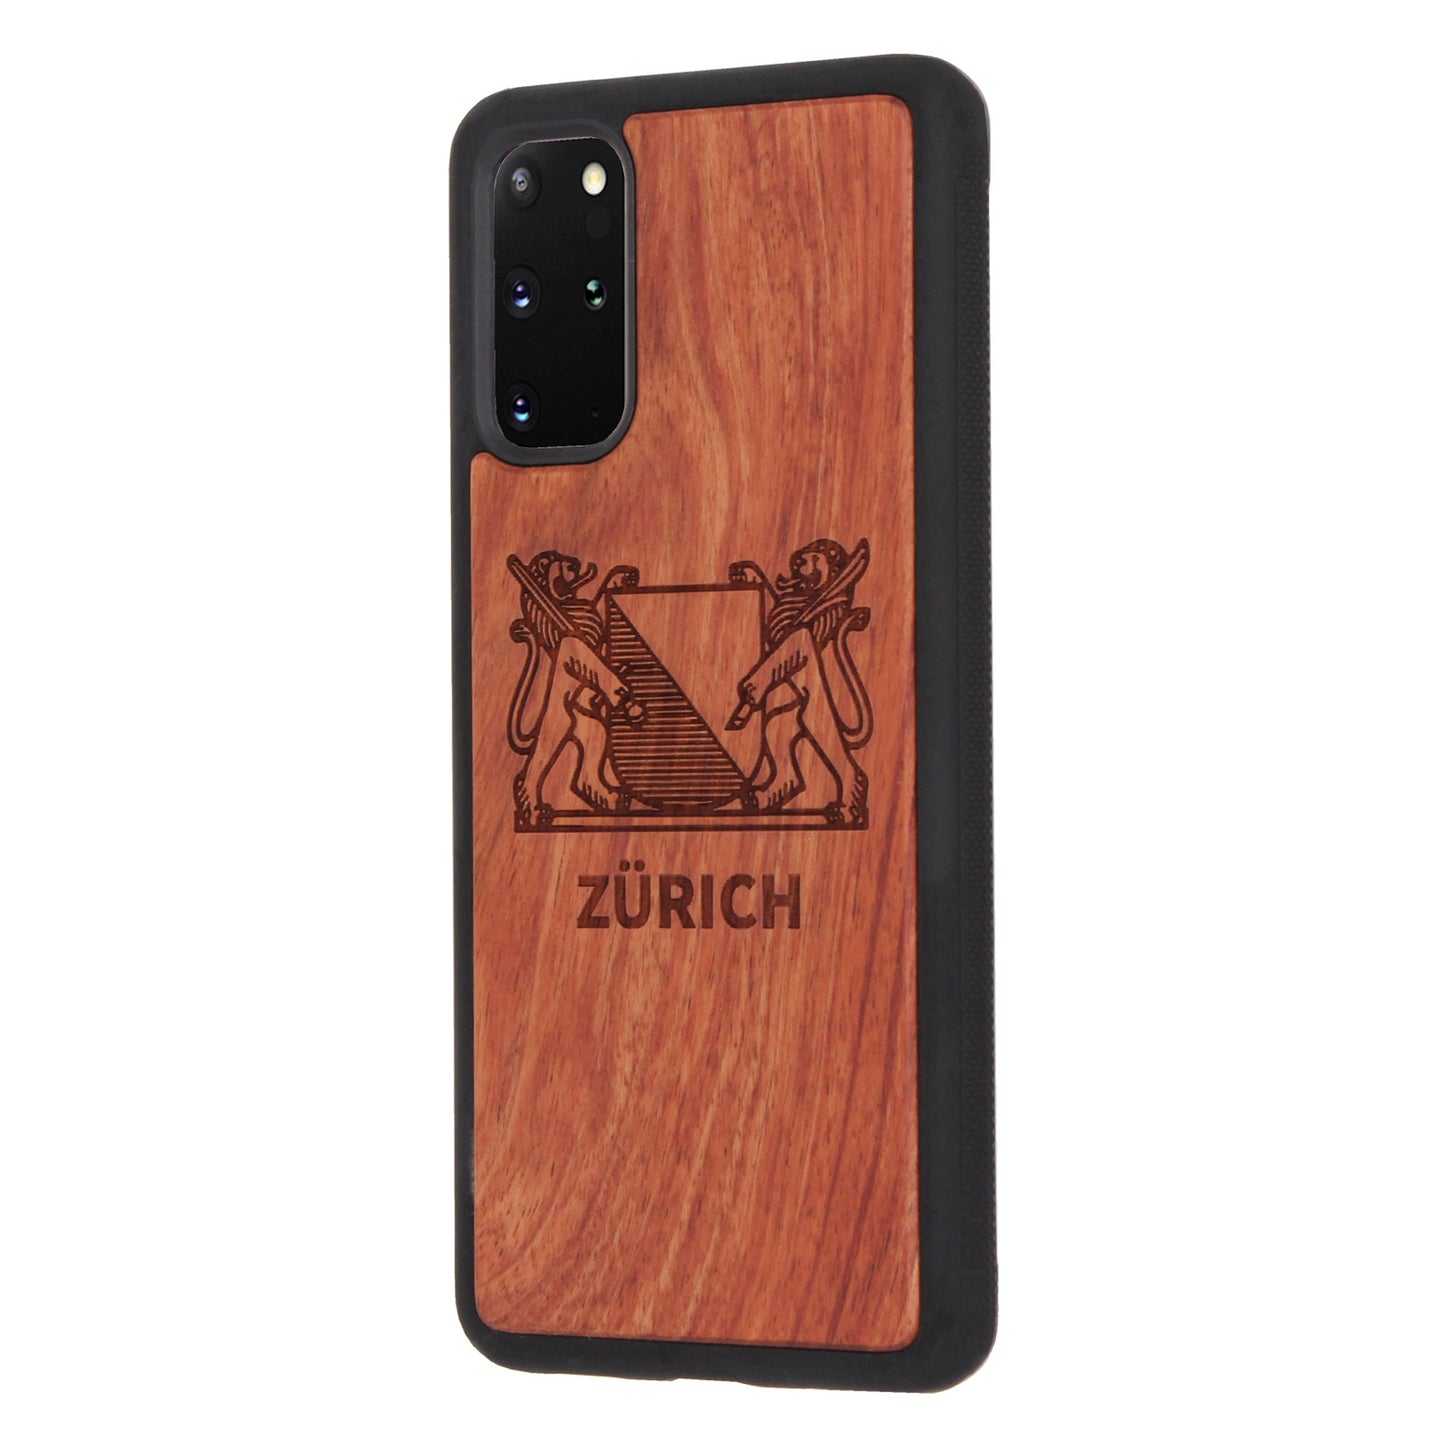 Zurich Coat of Arms Eden Rosewood Case for Samsung Galaxy S20 Plus